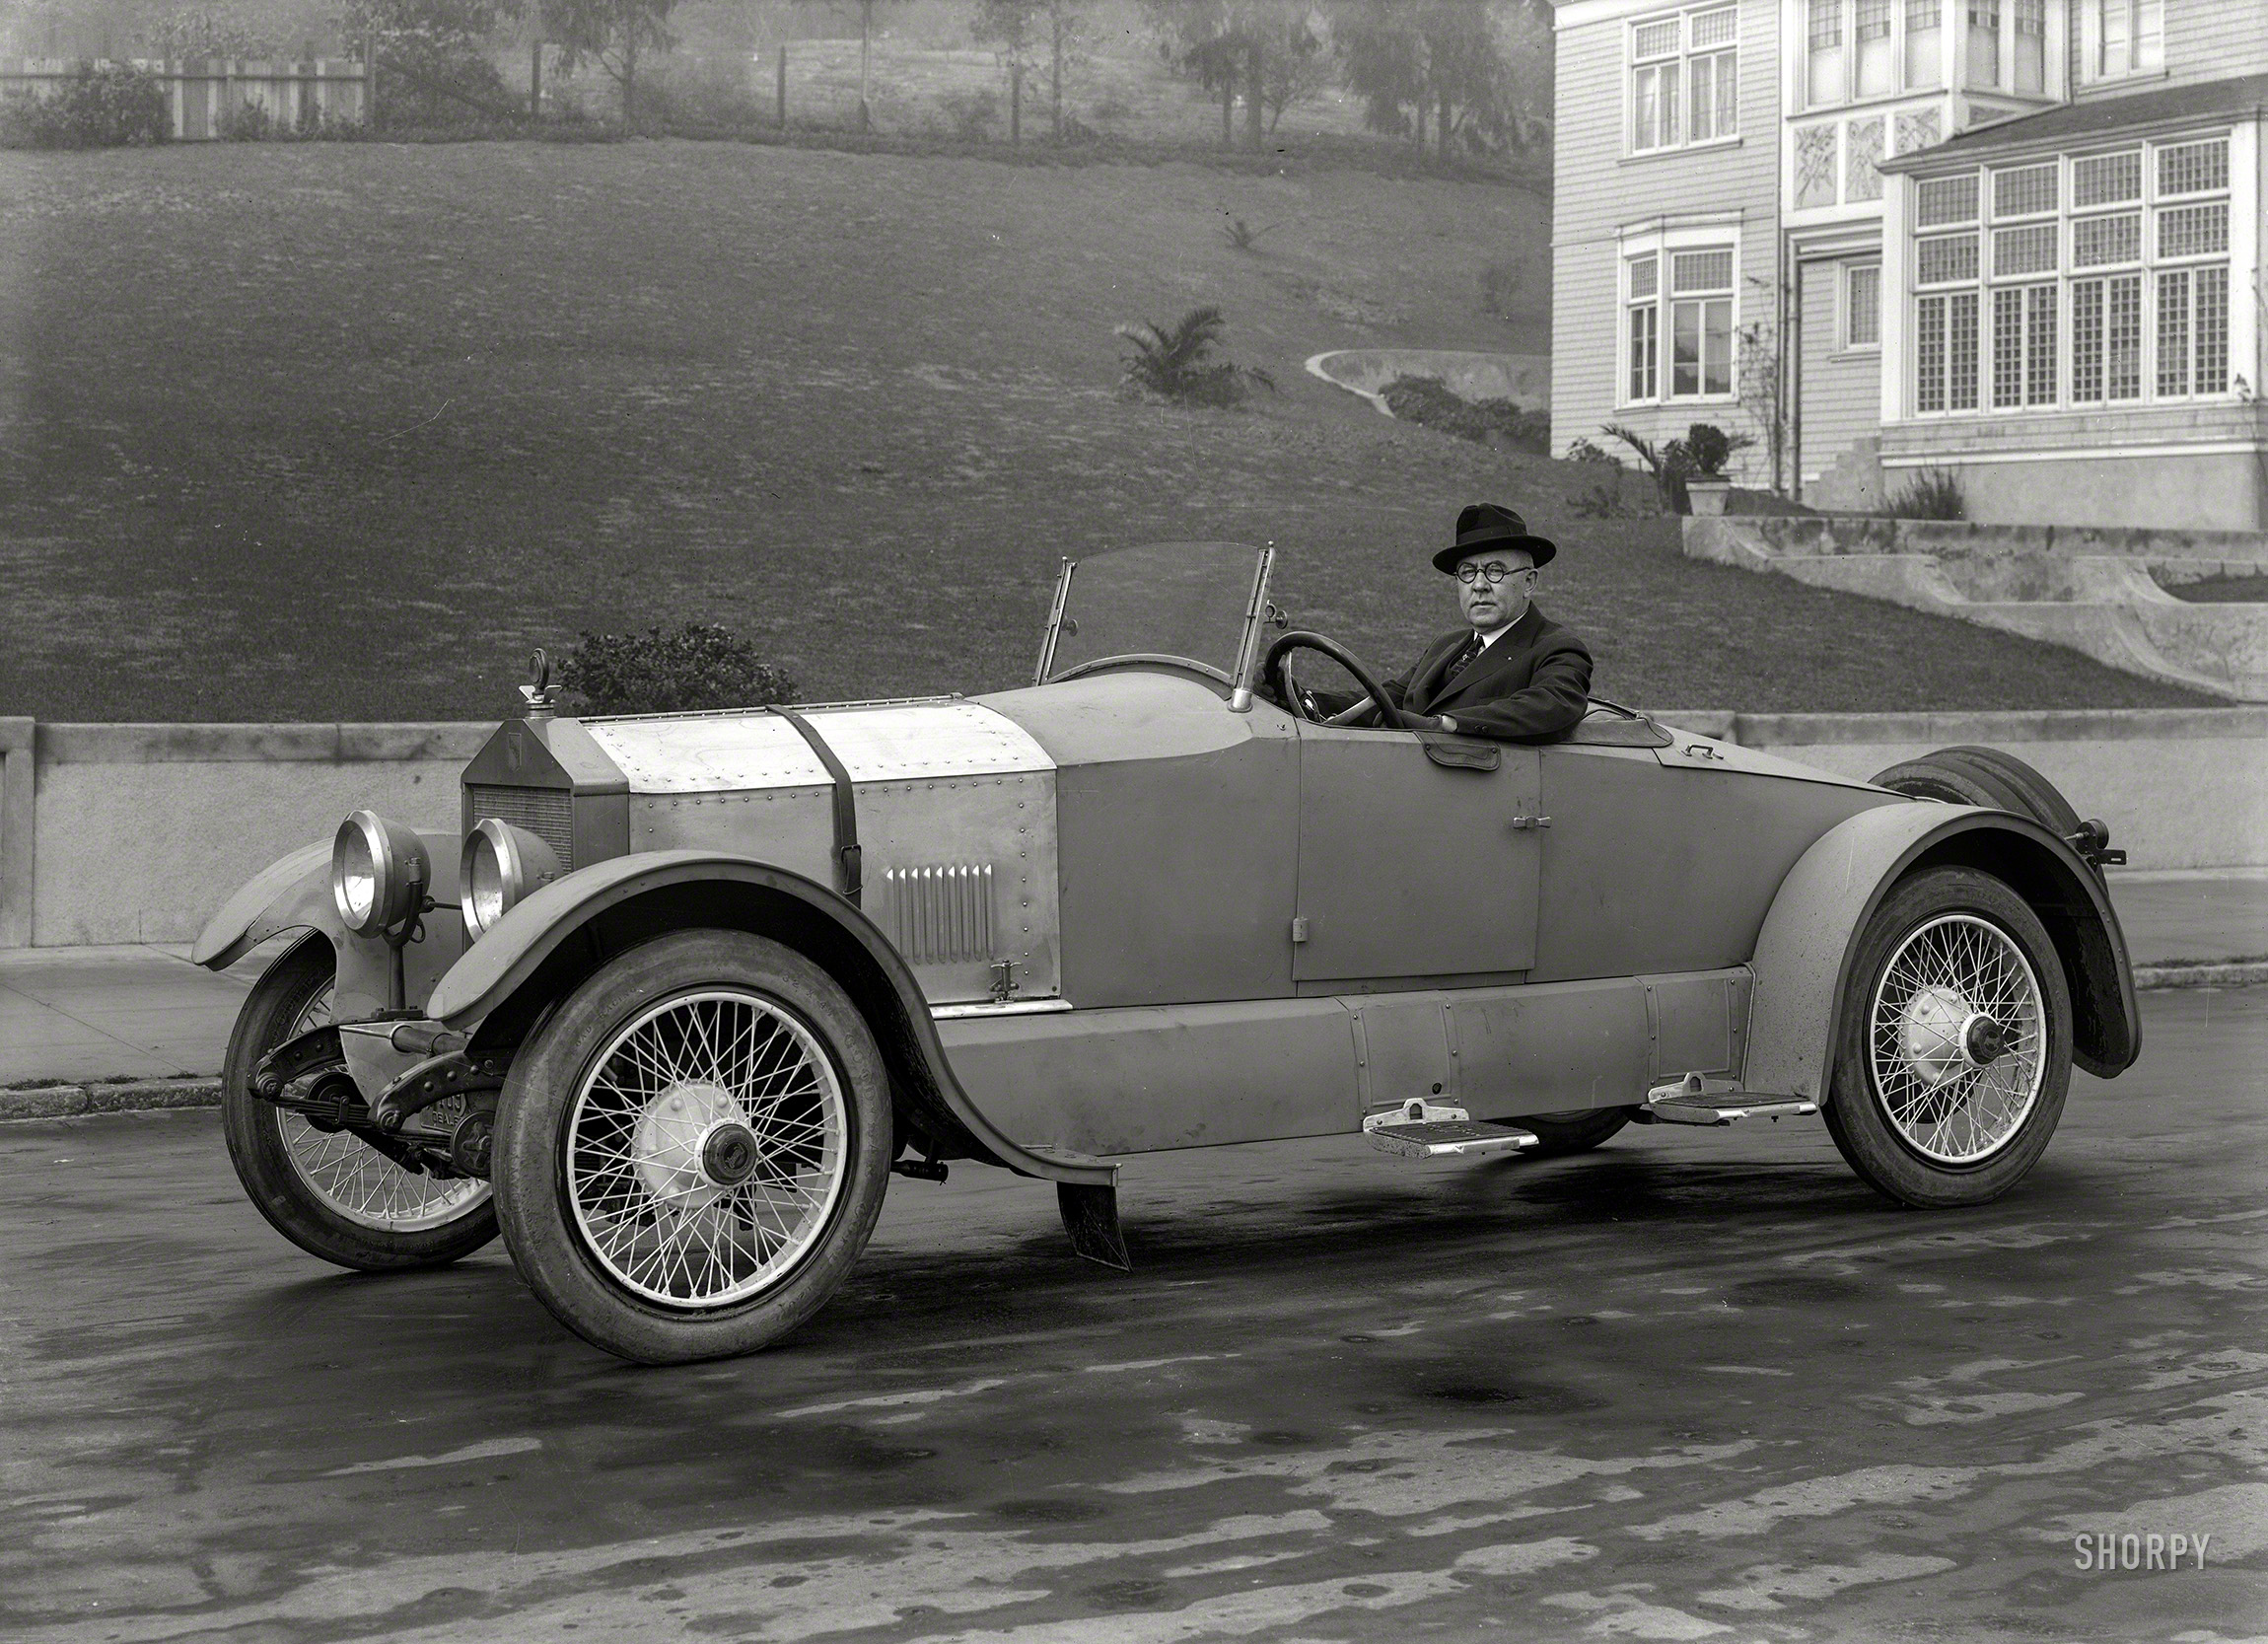 &nbsp; &nbsp; &nbsp; &nbsp; Built in Kalamazoo, Michigan, by the Barley Motor Car Co., the Roamer was marketed as "the affordable Rolls-Royce."
San Francisco circa 1921. "Roamer roadster." Today's entry on the Shorpy Chart of Chilly Chariots. 5x7 glass negative by Christopher Helin. View full size.